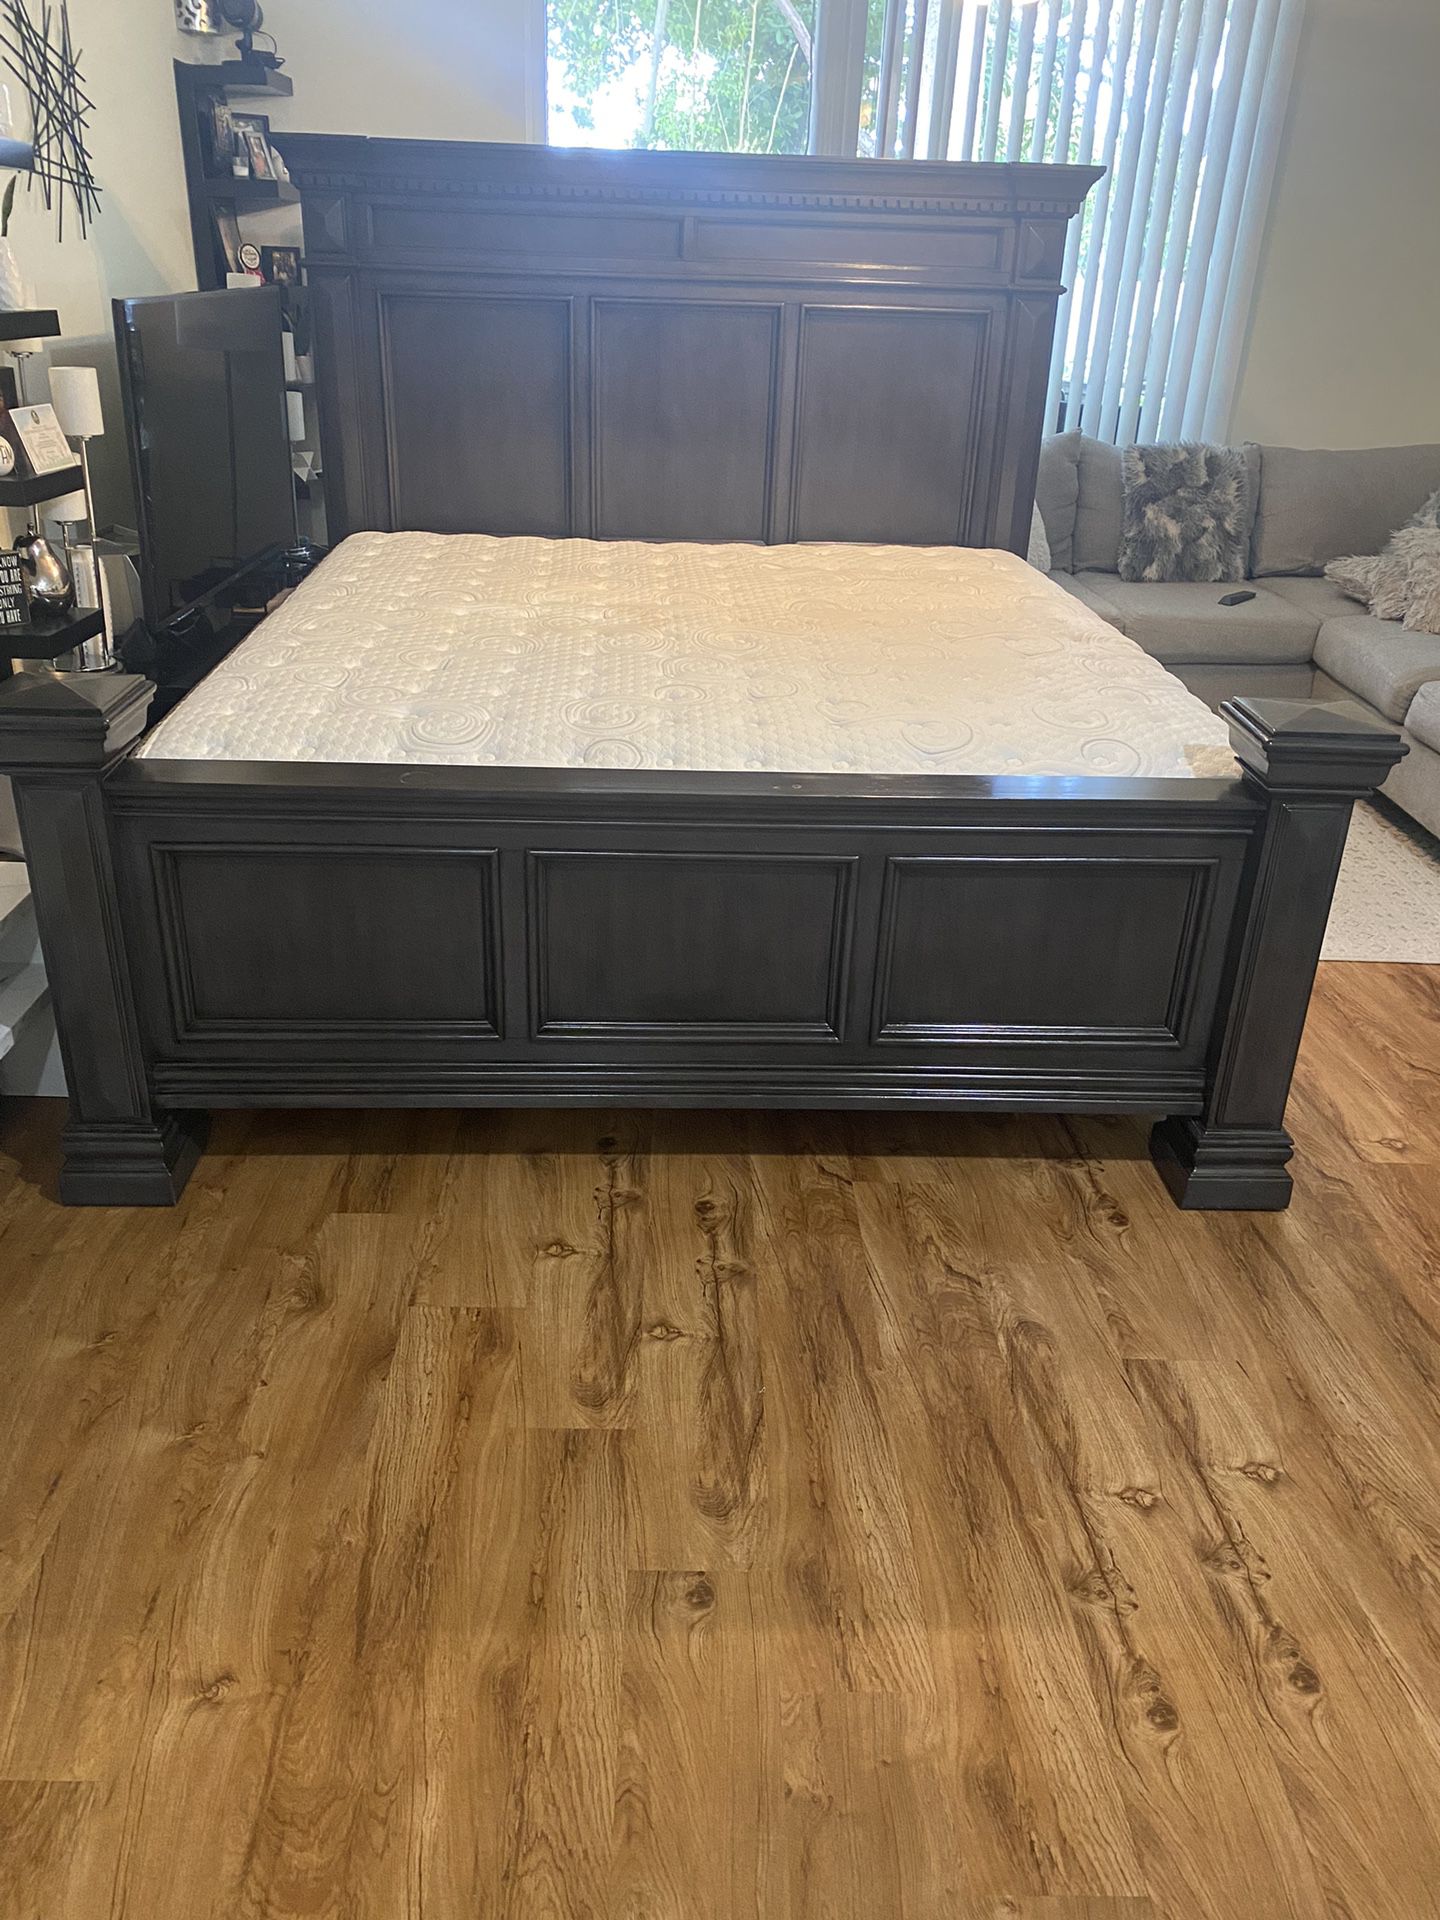 King Bed Frame And Mattress 